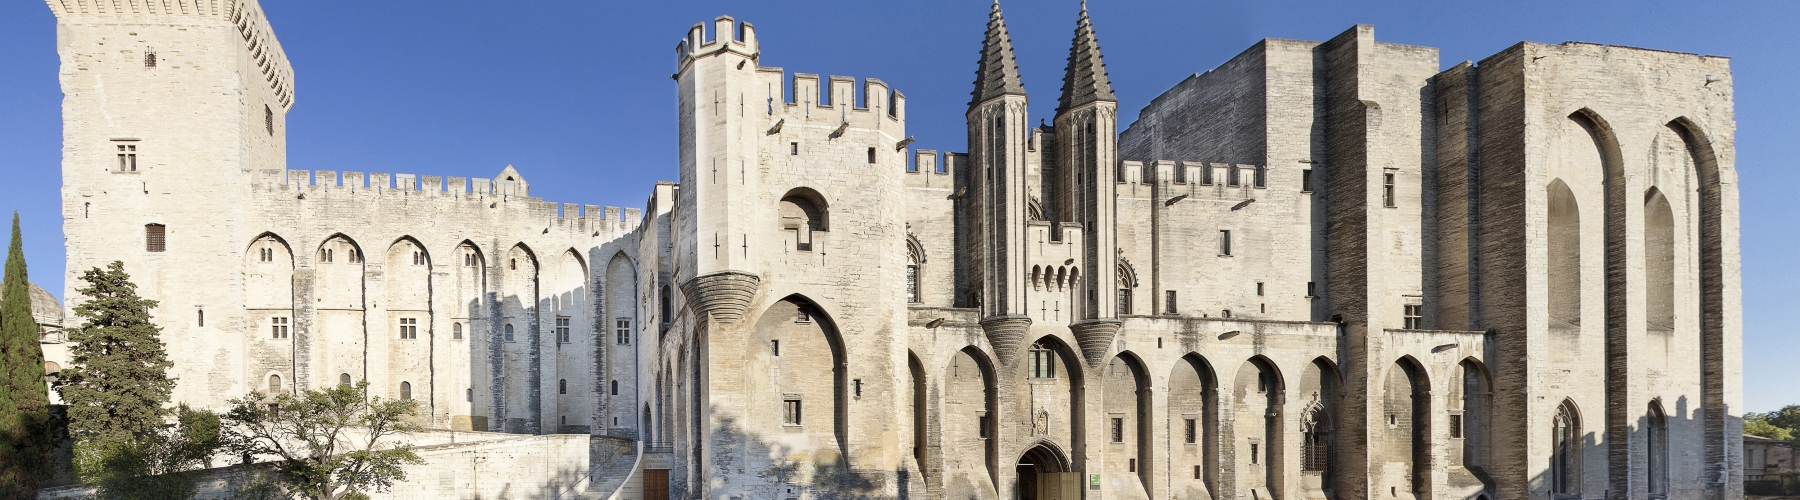 A stay in Avignon – an unusual evening at the Popes’ Palace